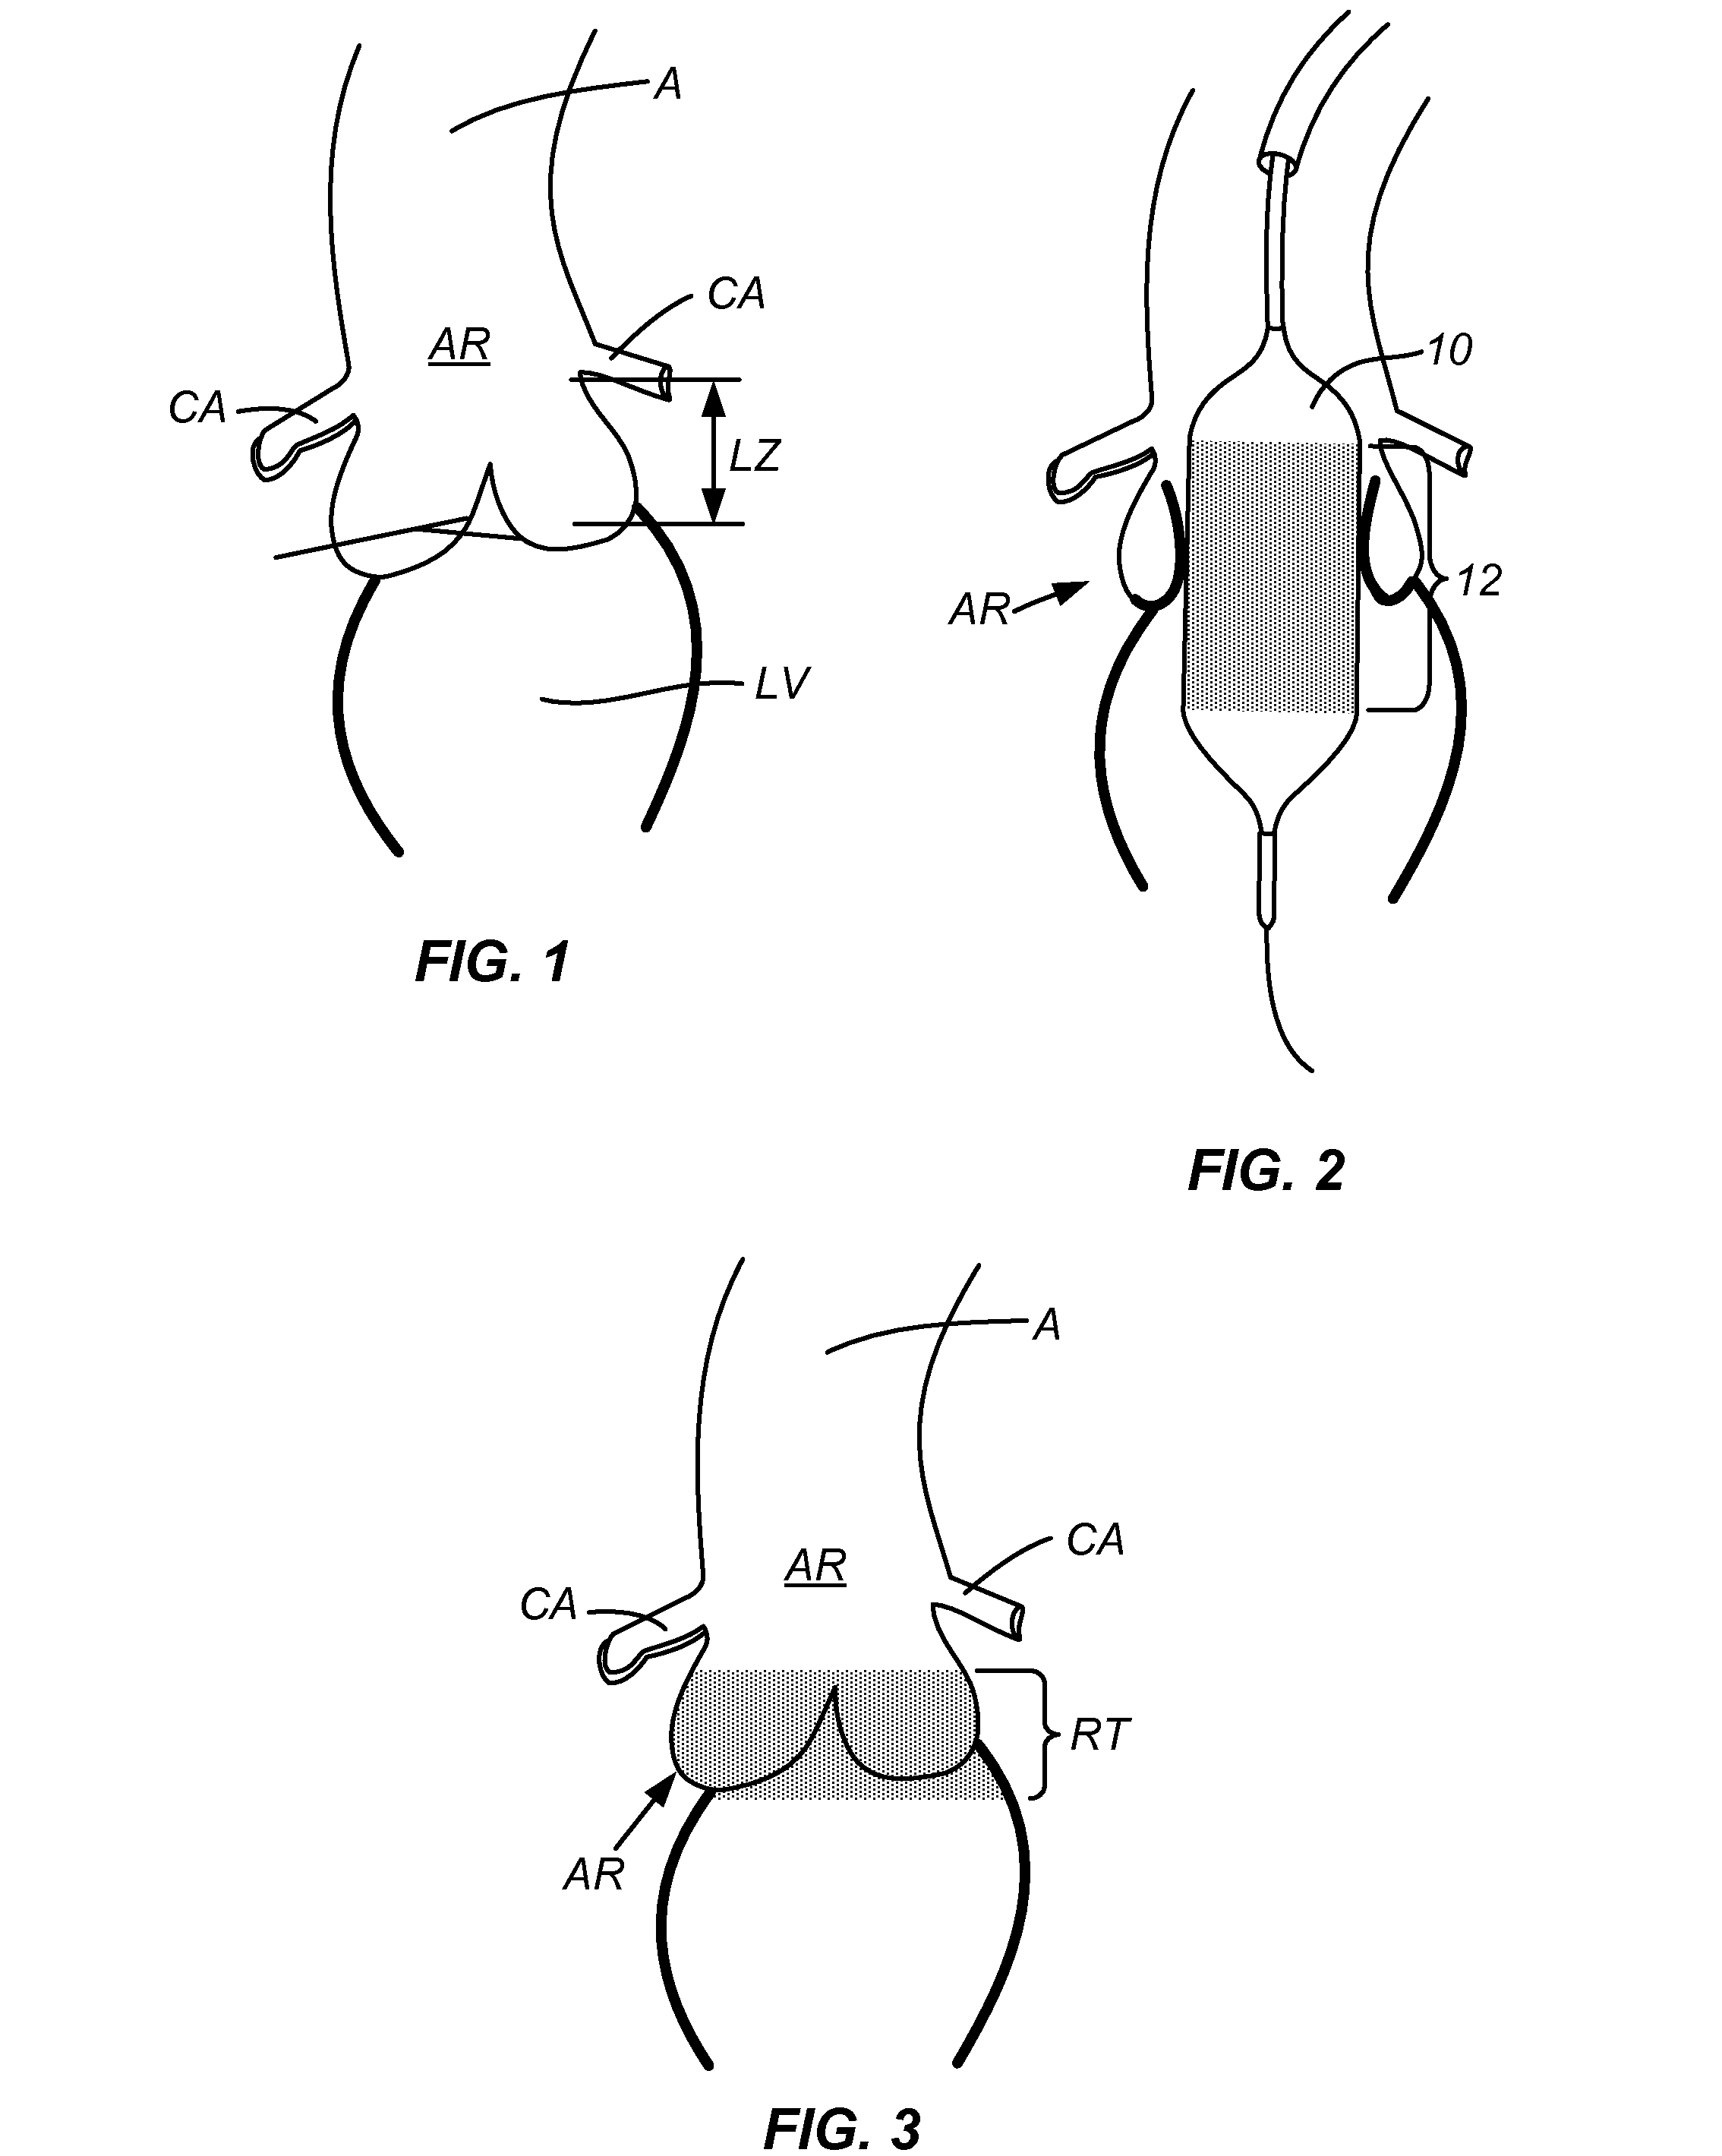 Device and methods for delivery and transfer of temporary radiopaque element